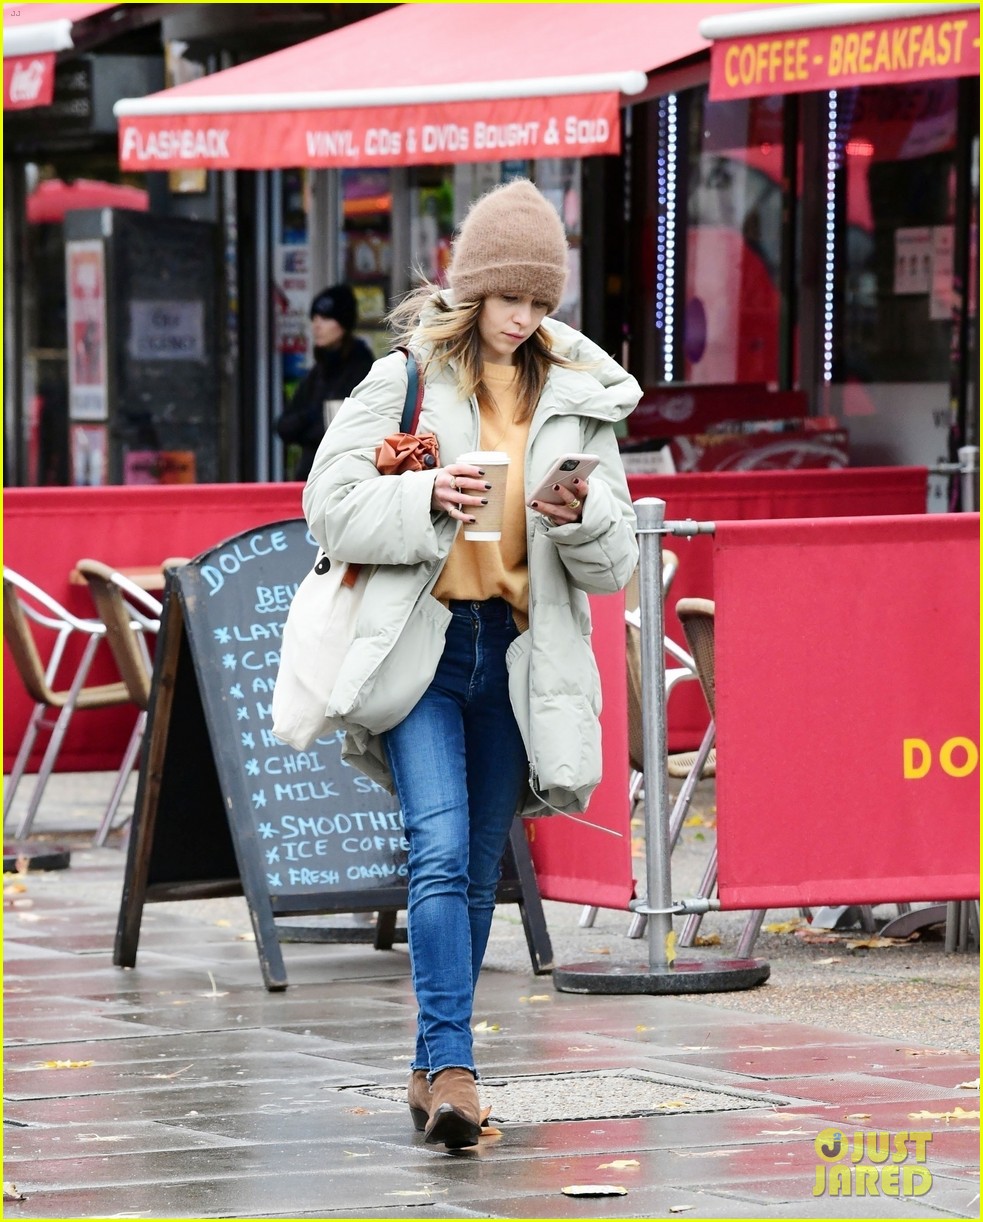 Emilia Clarke Bundles Up During a Chilly Fall Day in London: Photo 4495623 | Emilia Clarke ...